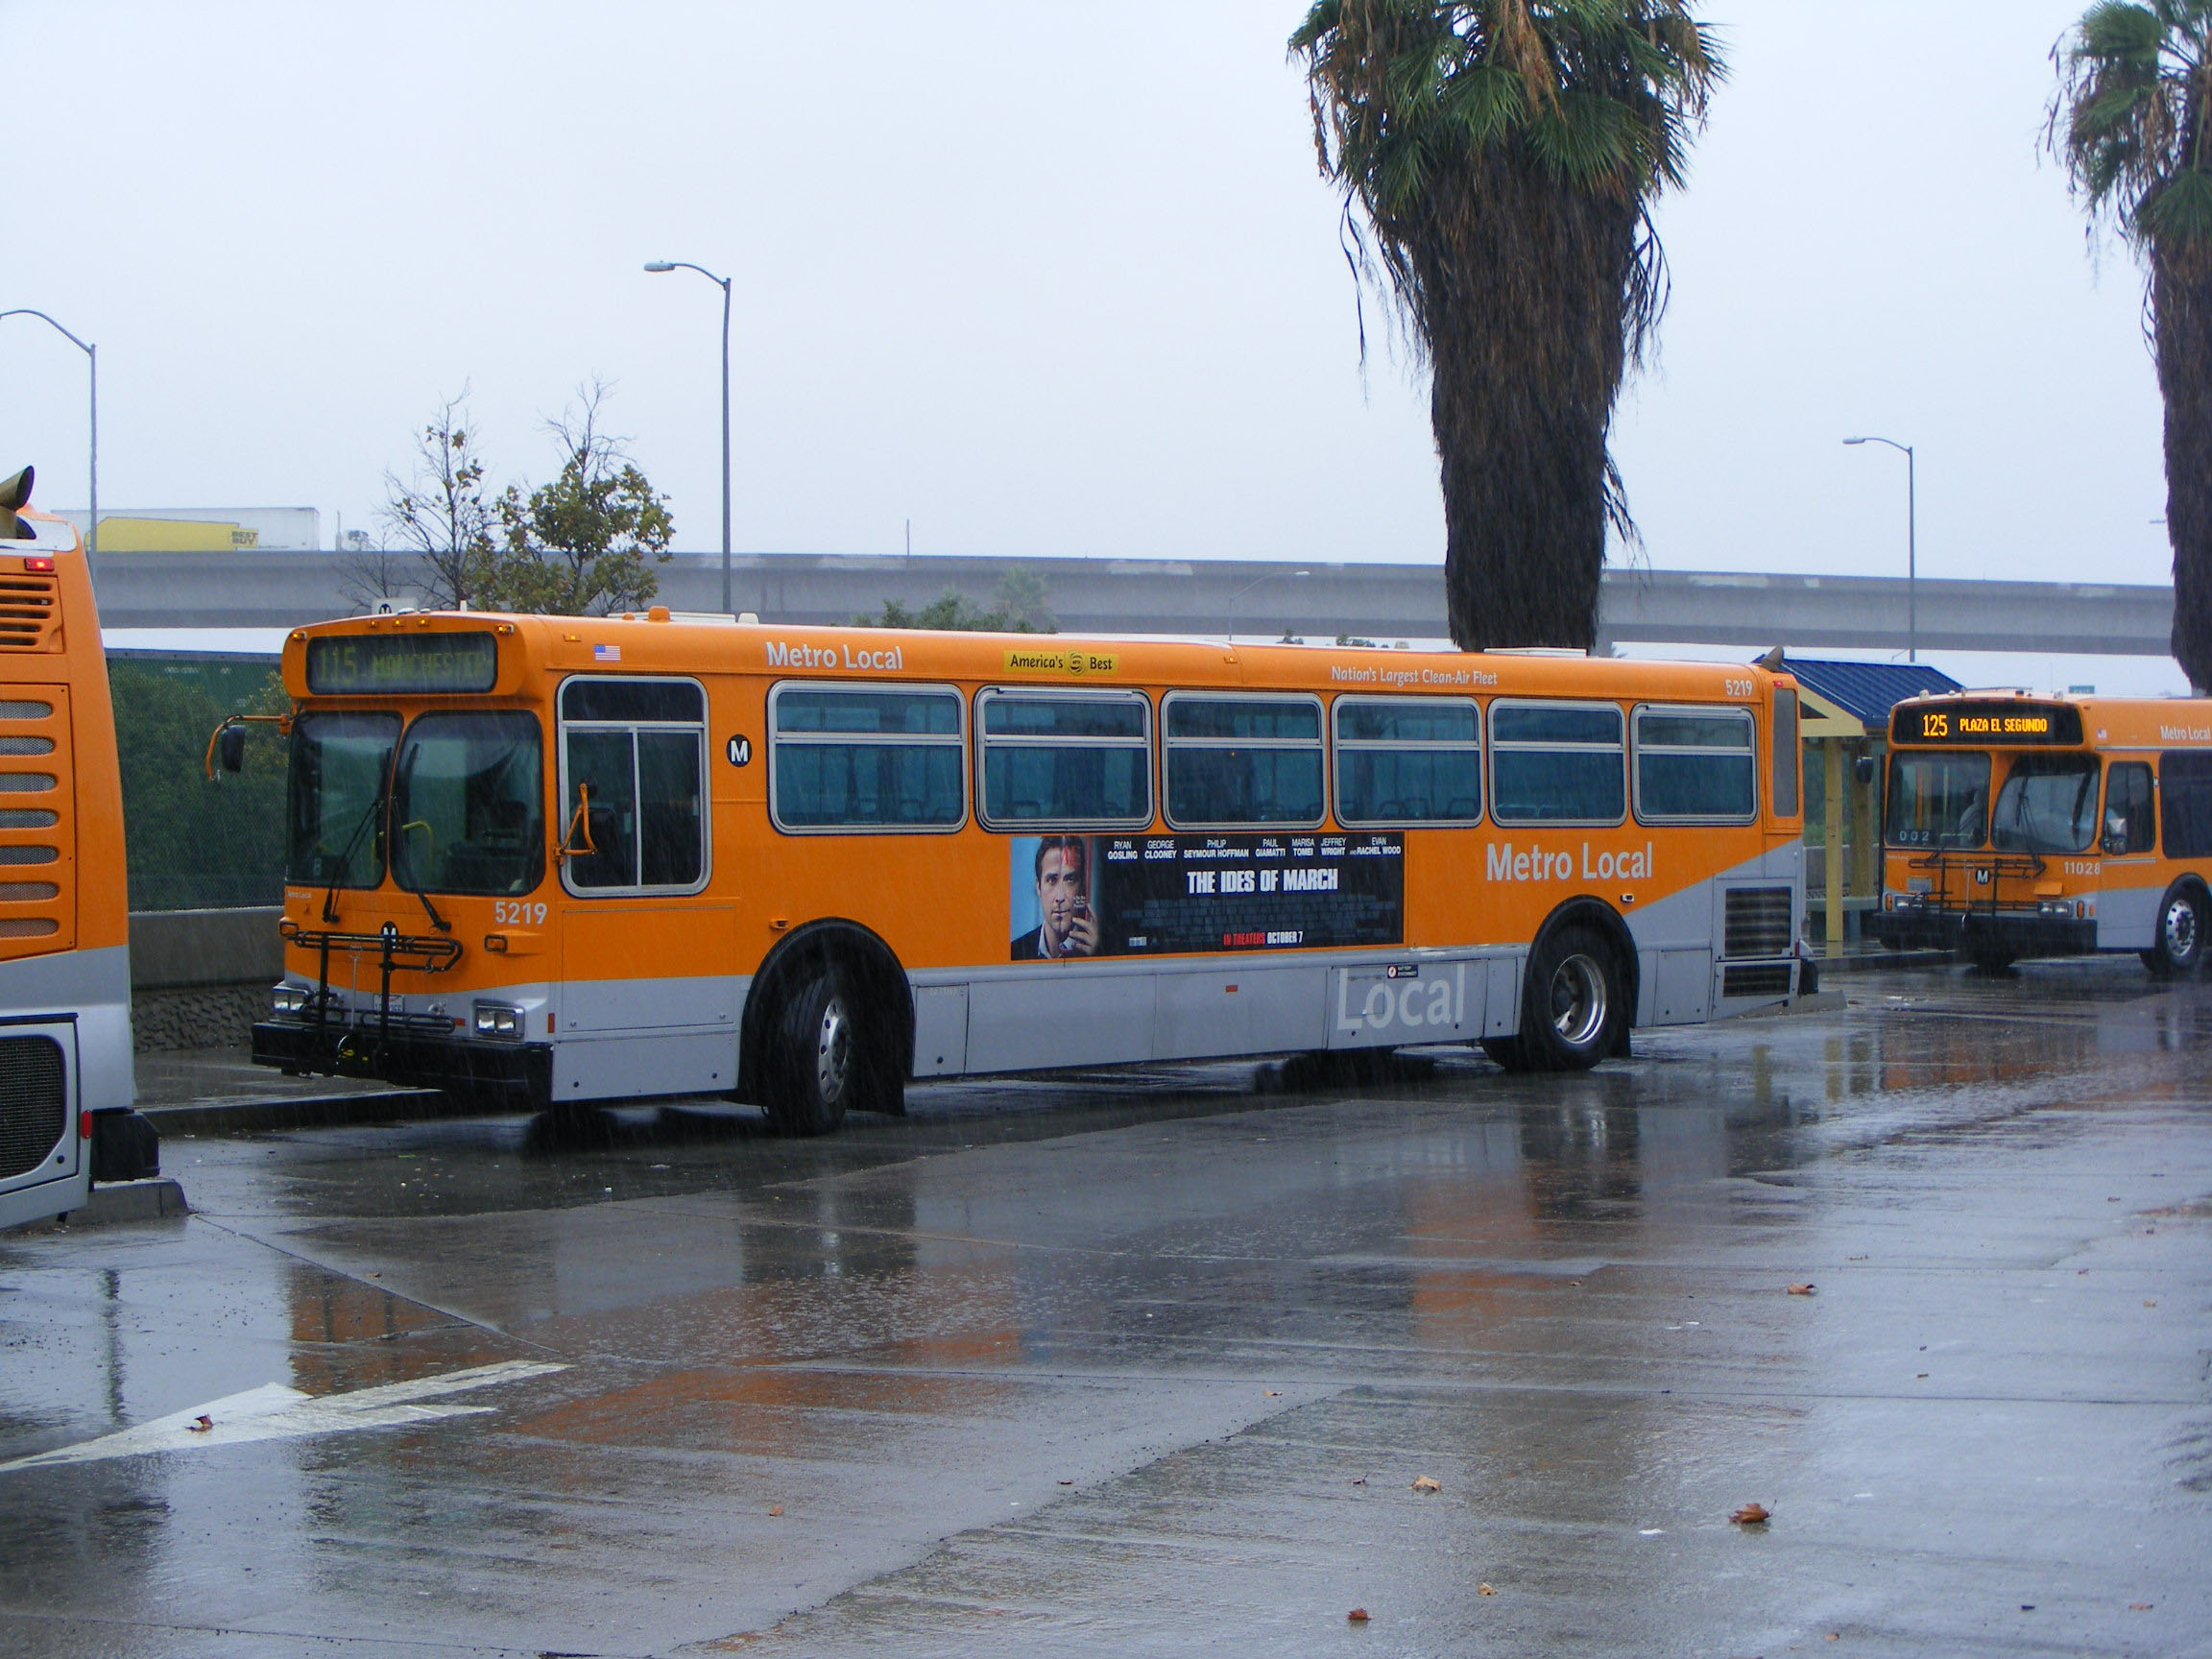 lacmta new buses